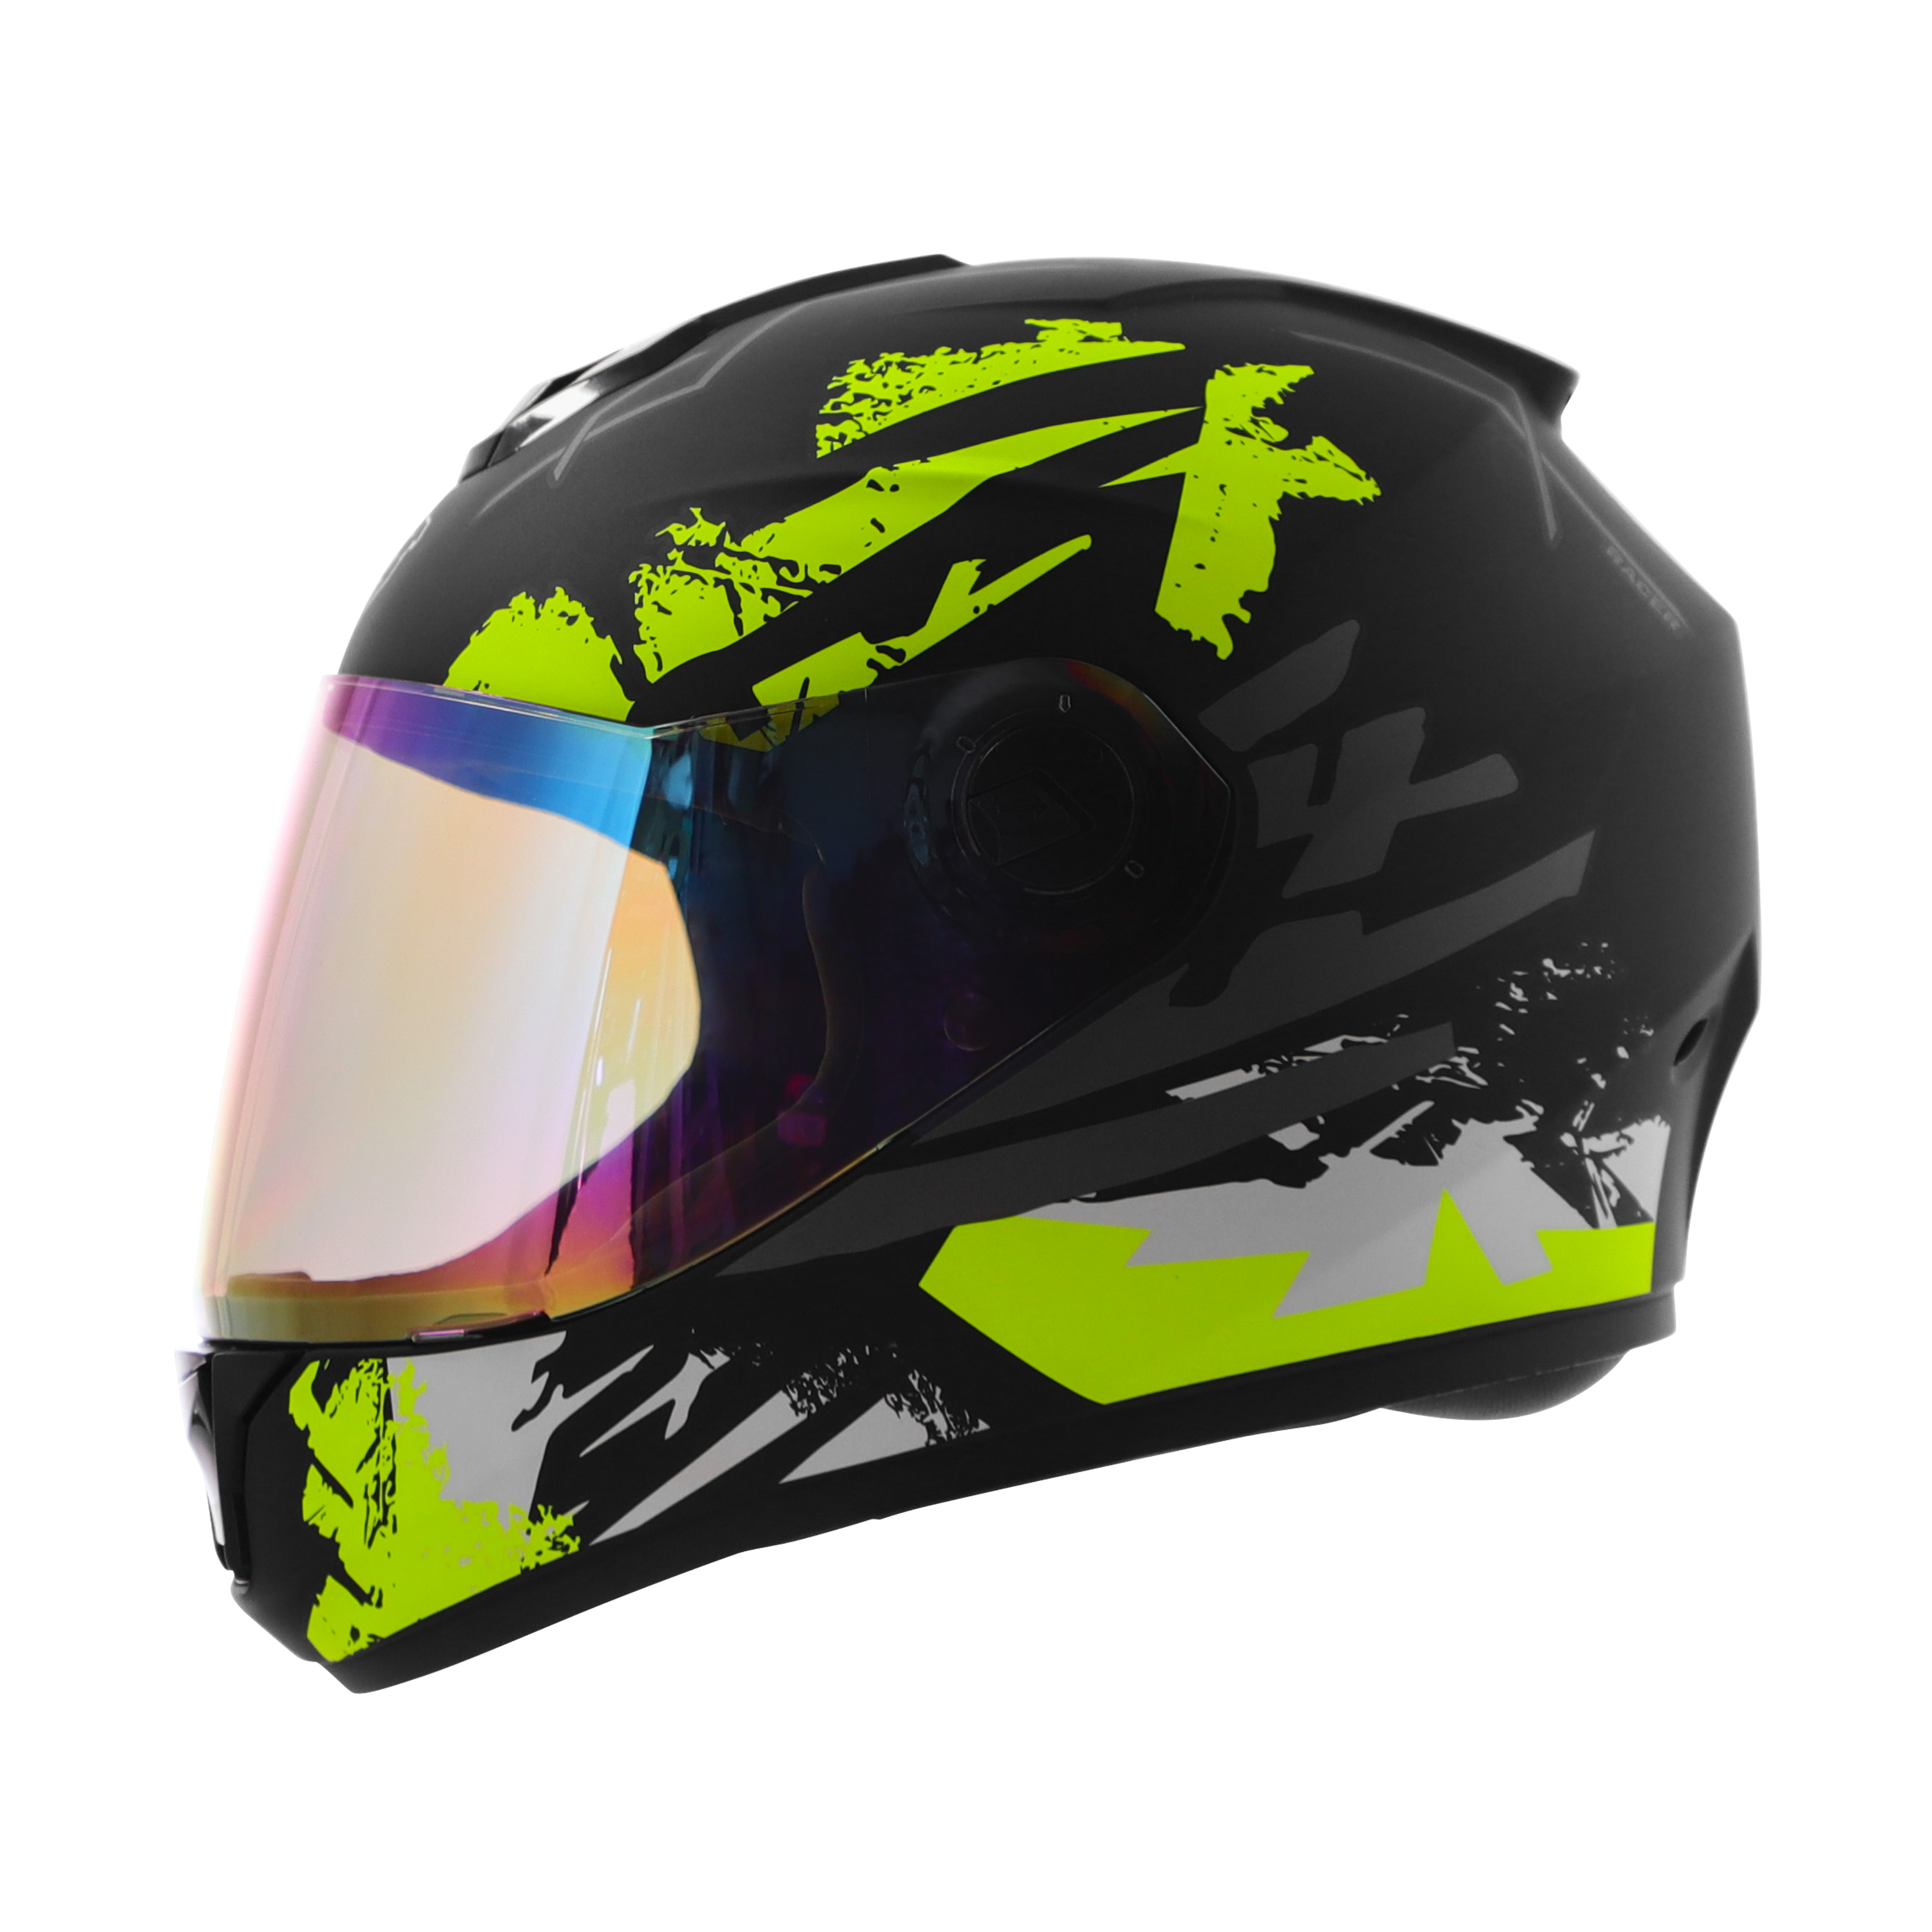 Steelbird SBH-11 Zoom Racer ISI Certified Full Face Graphic Helmet For Men And Women (Glossy Black Neon With Chrome Rainbow Visor)